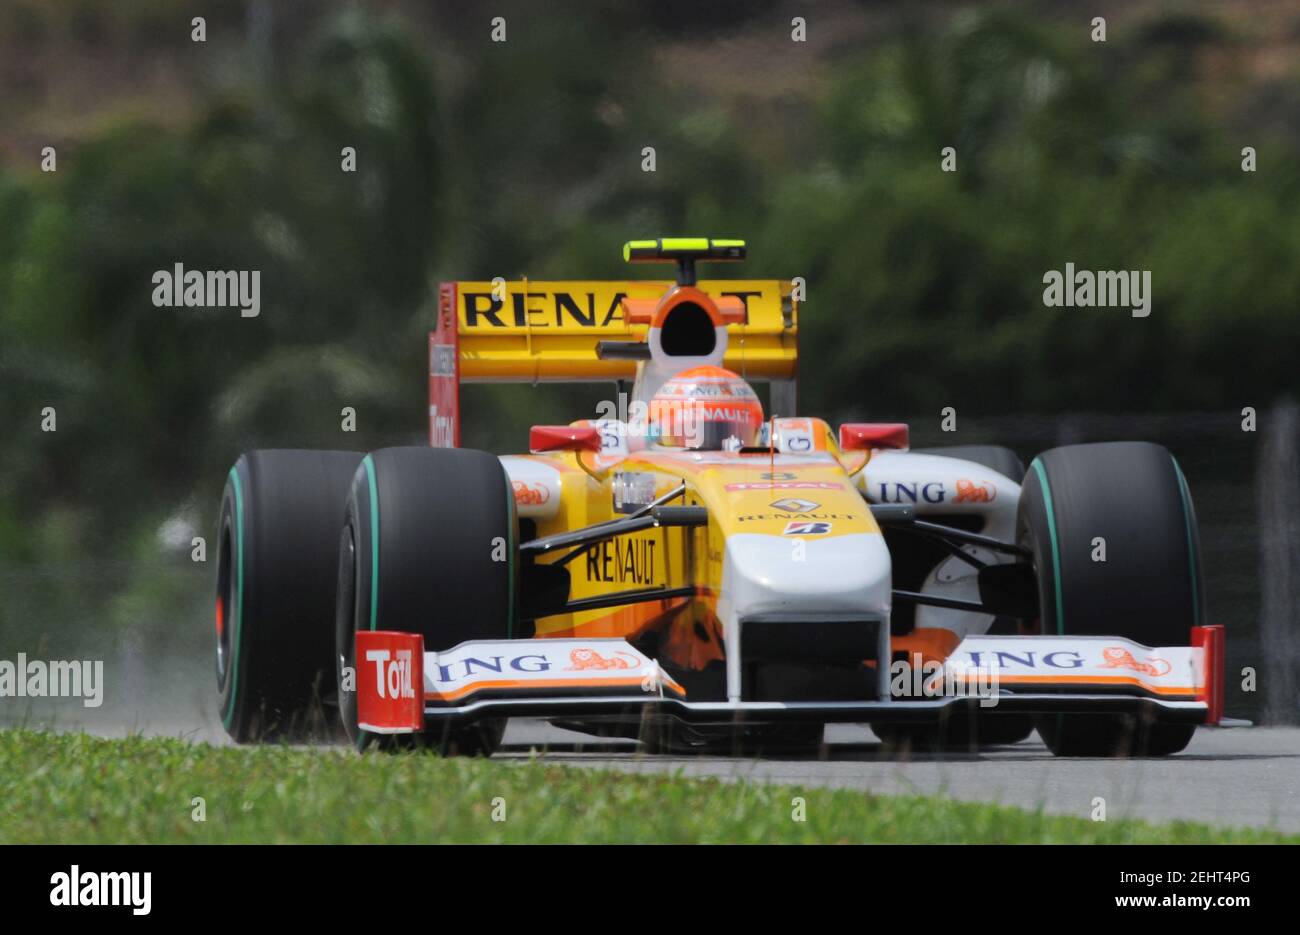 Formula One - F1 - Malaysian Grand Prix 2009 - Sepang International  Circuit, Kuala Lumpur, Malaysia - 4/4/09 Nelson Piquet Junior of Renault in  action during practice Mandatory Credit: Action Images / Crispin Thruston  Livepic Stock Photo - Alamy